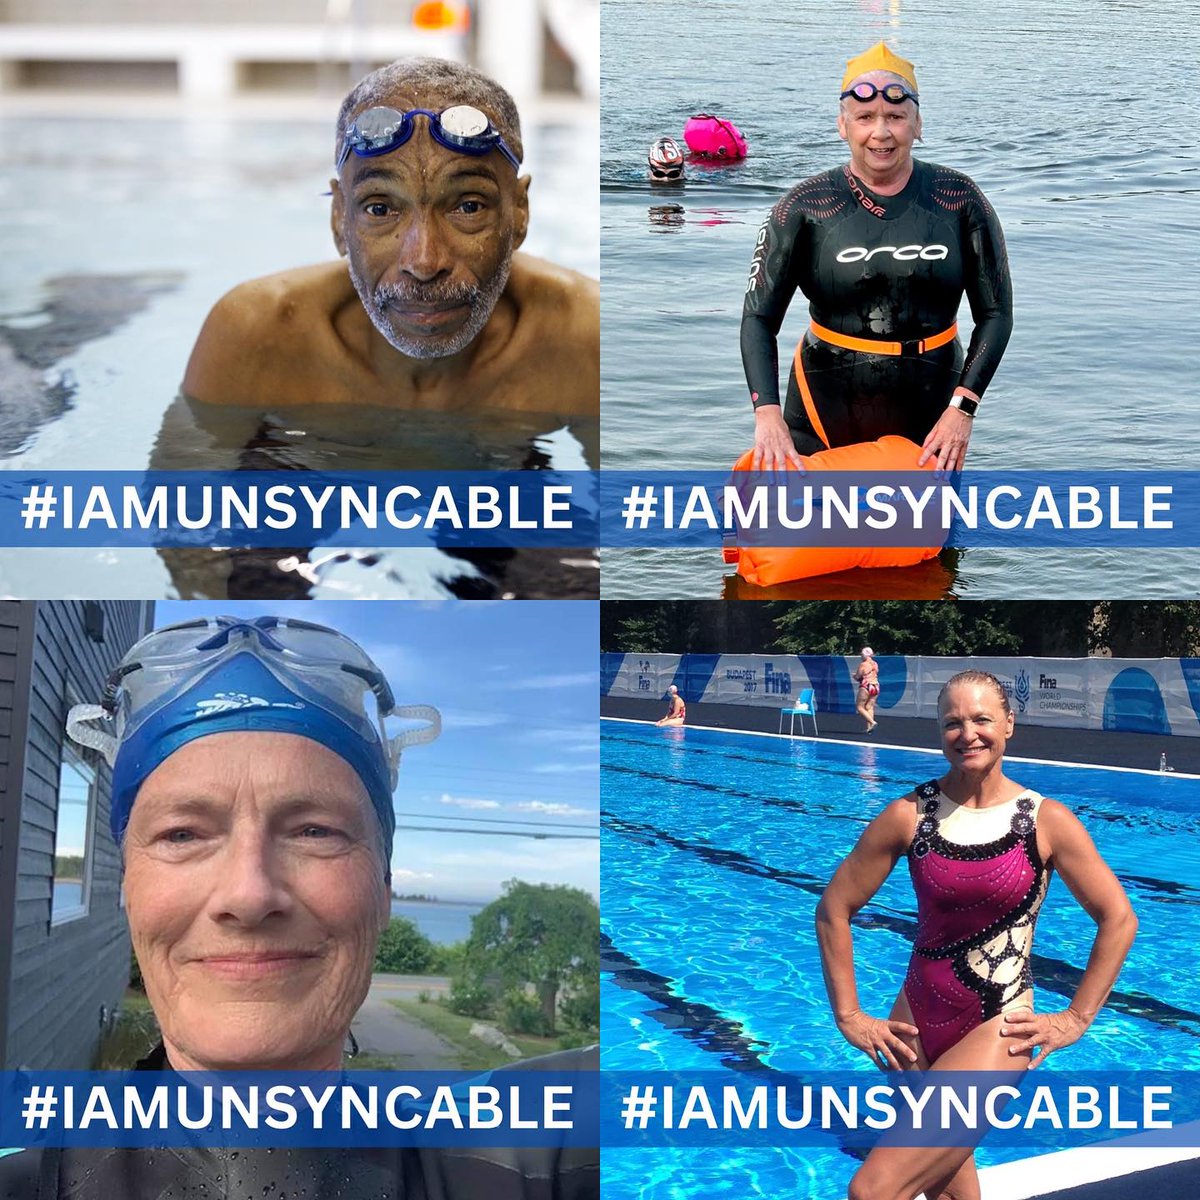 Calling All Unsyncables! We’re sharing stories of #swimmers #60 plus #inspiring us to keep #active and #agebetter. If that sounds like you send us a message mailchi.mp/86dc744b6017/c…